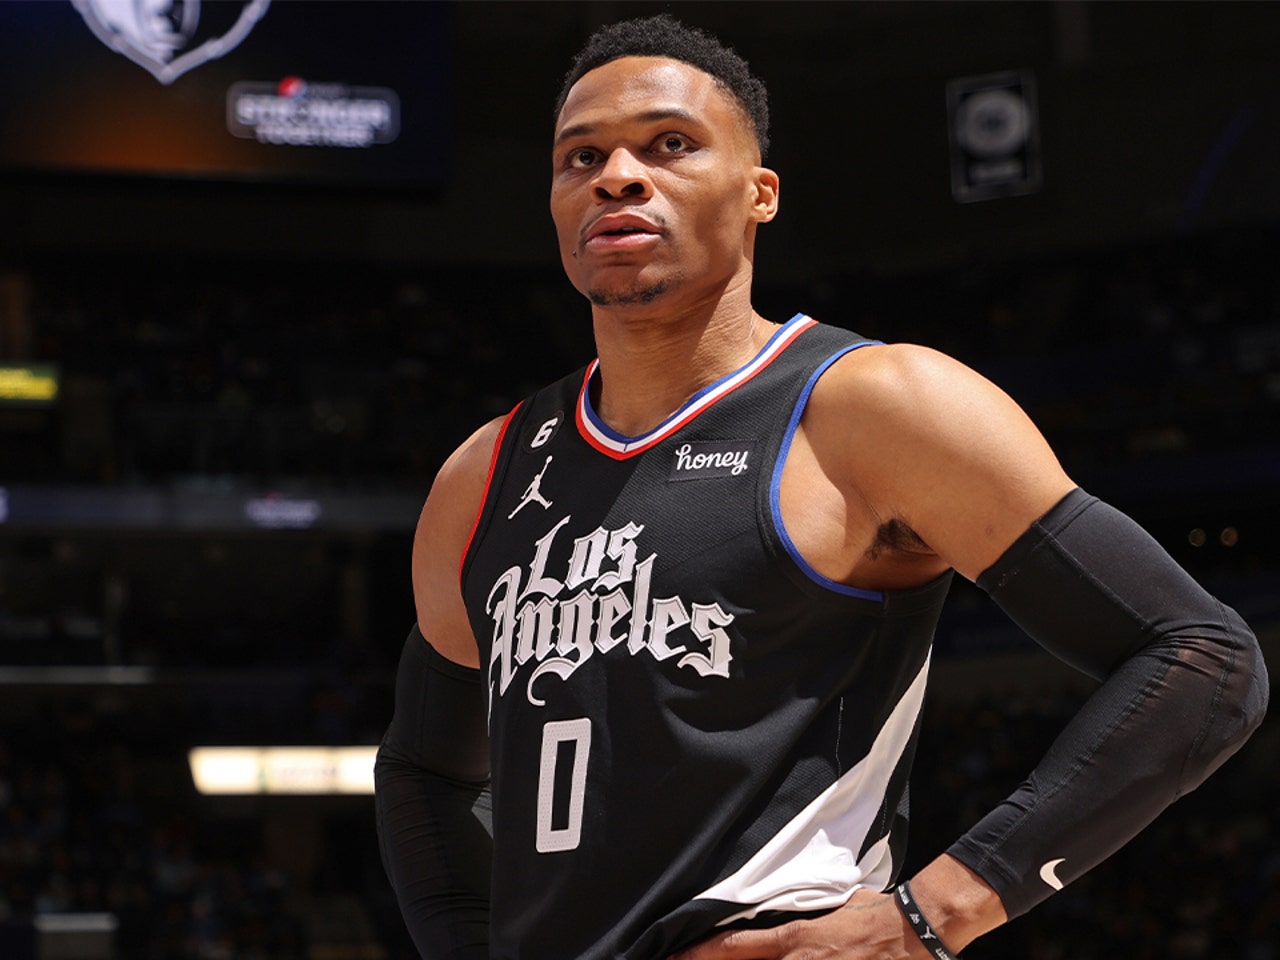 Russell Westbrook scores season-high 36 points in Clippers win vs